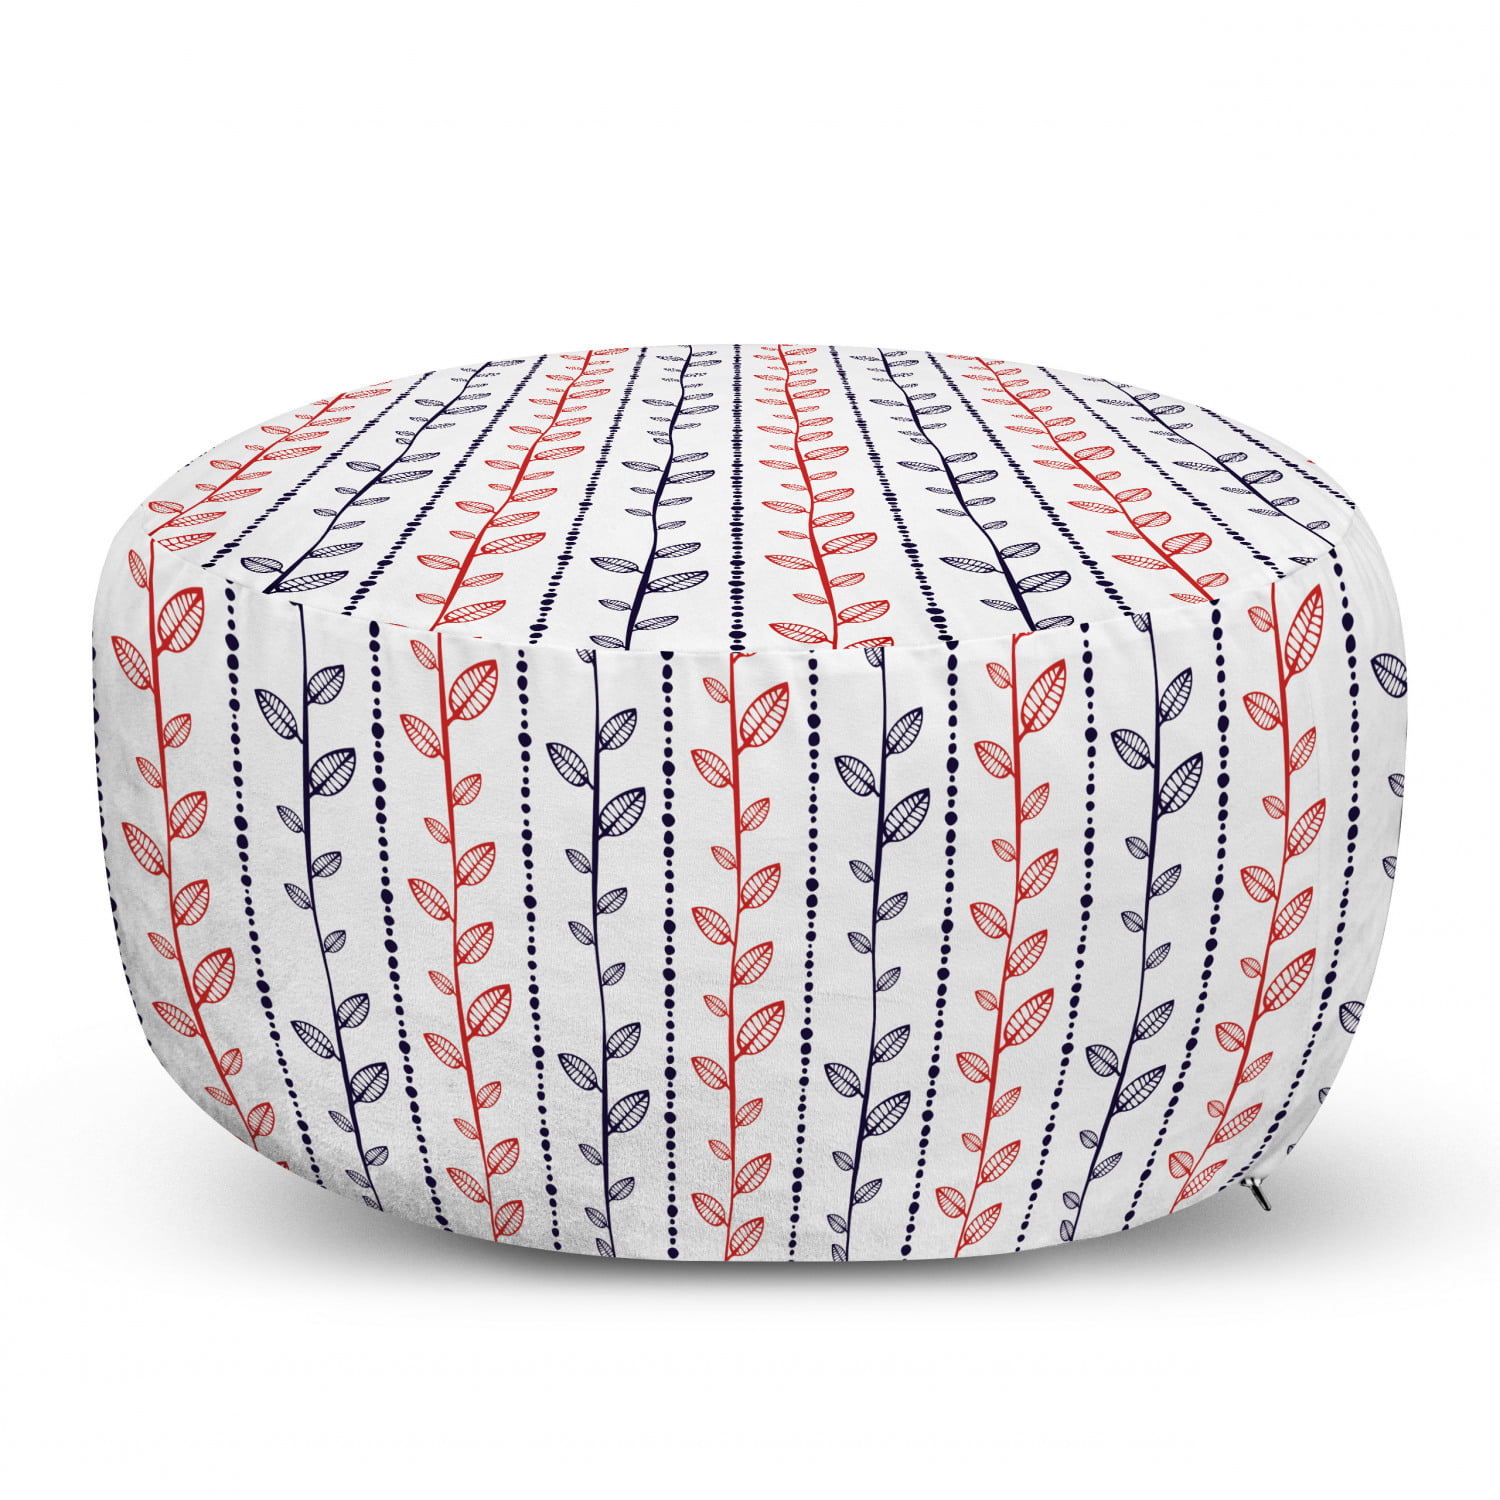 Rhythmic Berries and Leaves Colorful Sketch Pattern on Plain Background Burnt Sienna White Ambesonne Strawberry Rectangle Pouf Under Desk Foot Stool for Living Room Office Ottoman with Cover 25